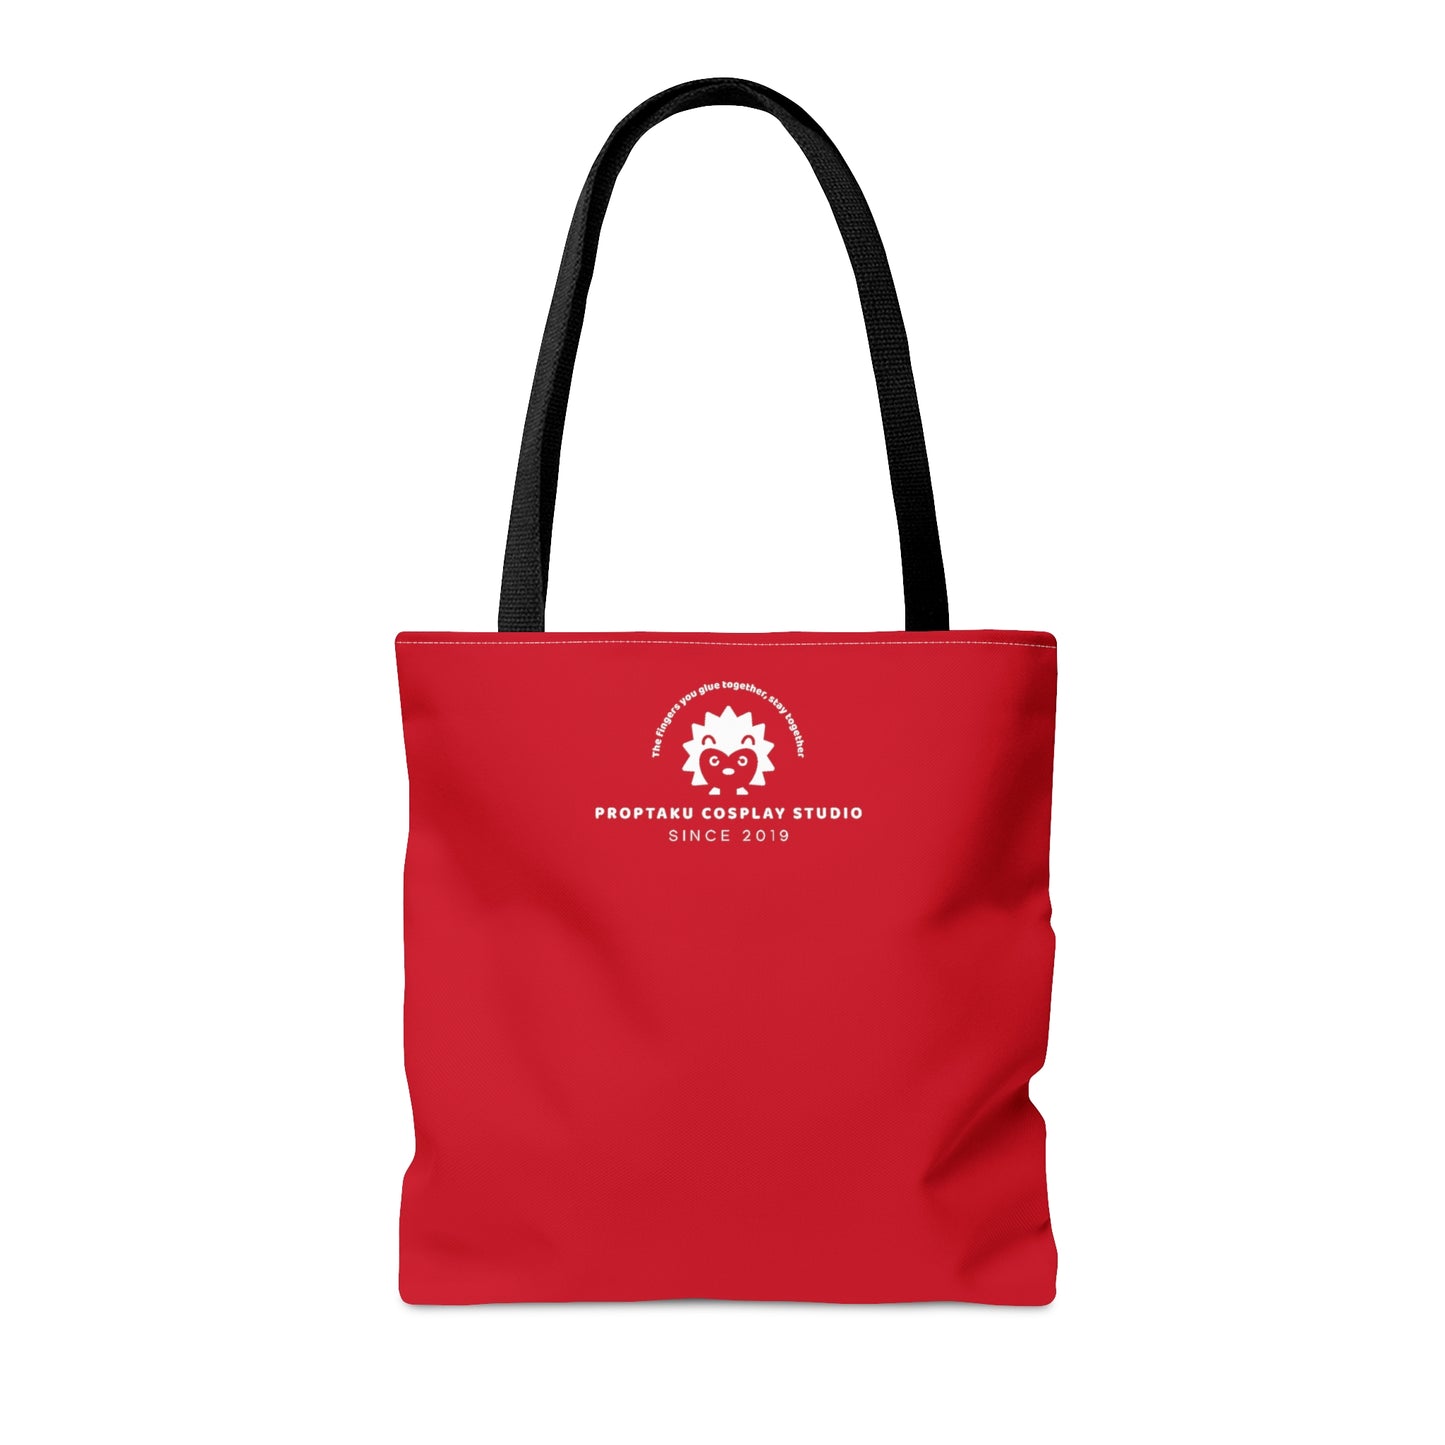 After-Con "Feel it in your Psyche" Tote Bag